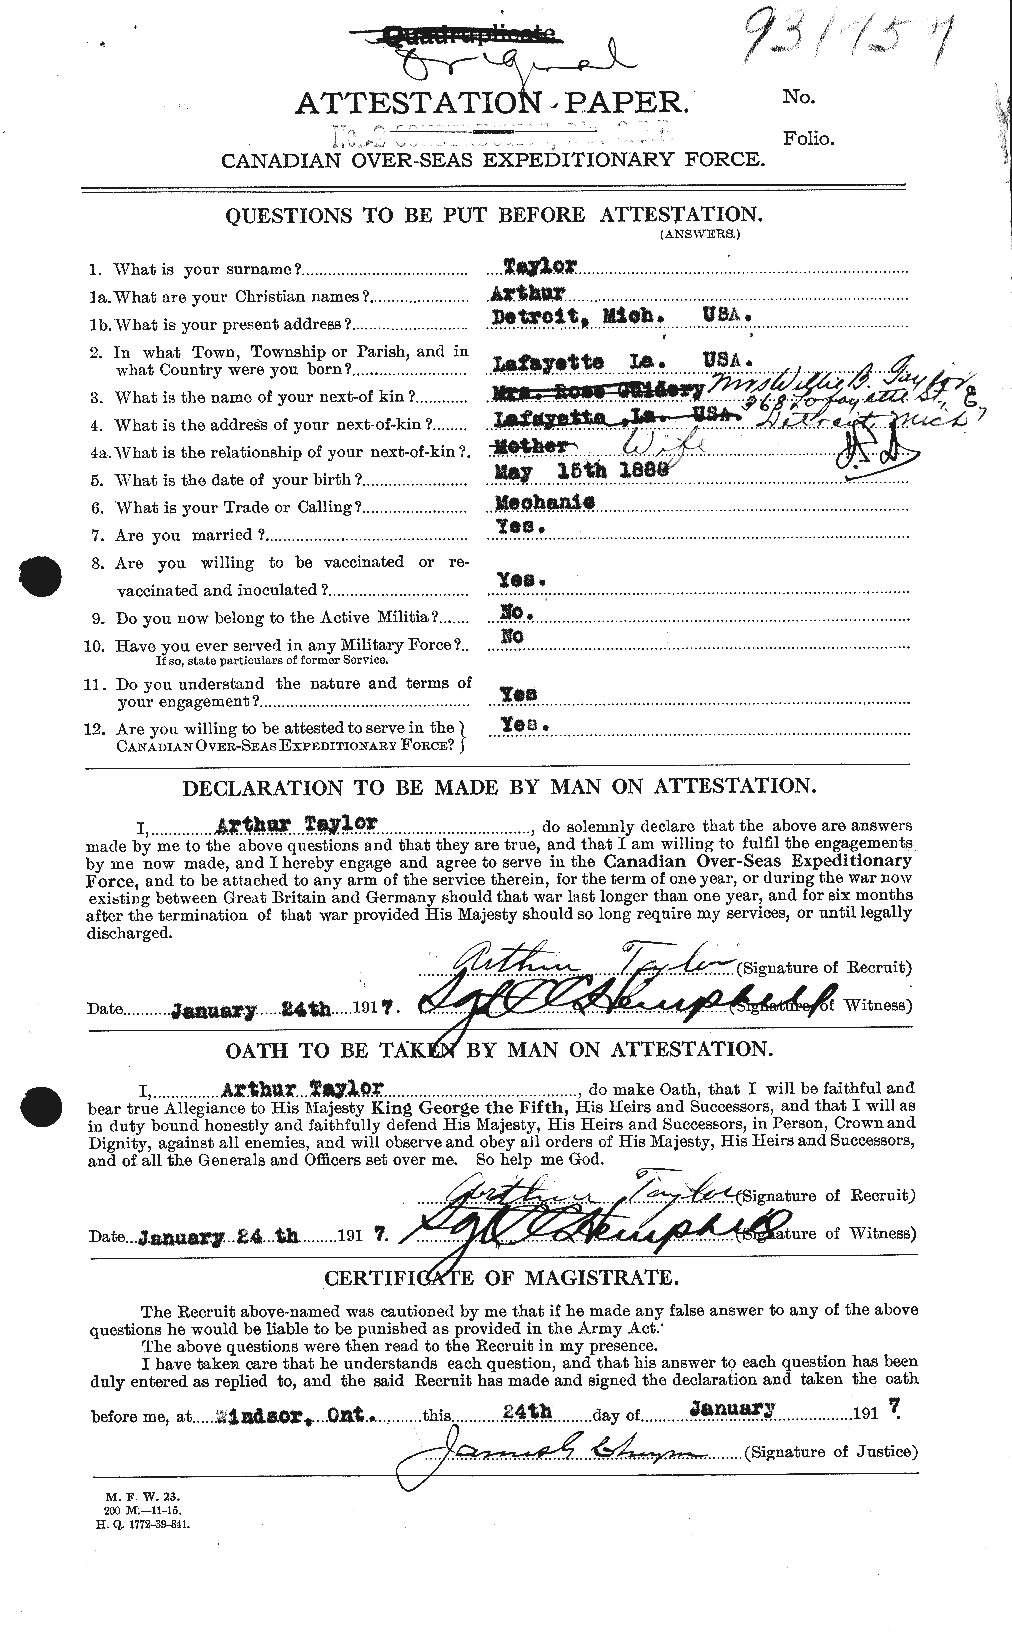 Personnel Records of the First World War - CEF 626263a